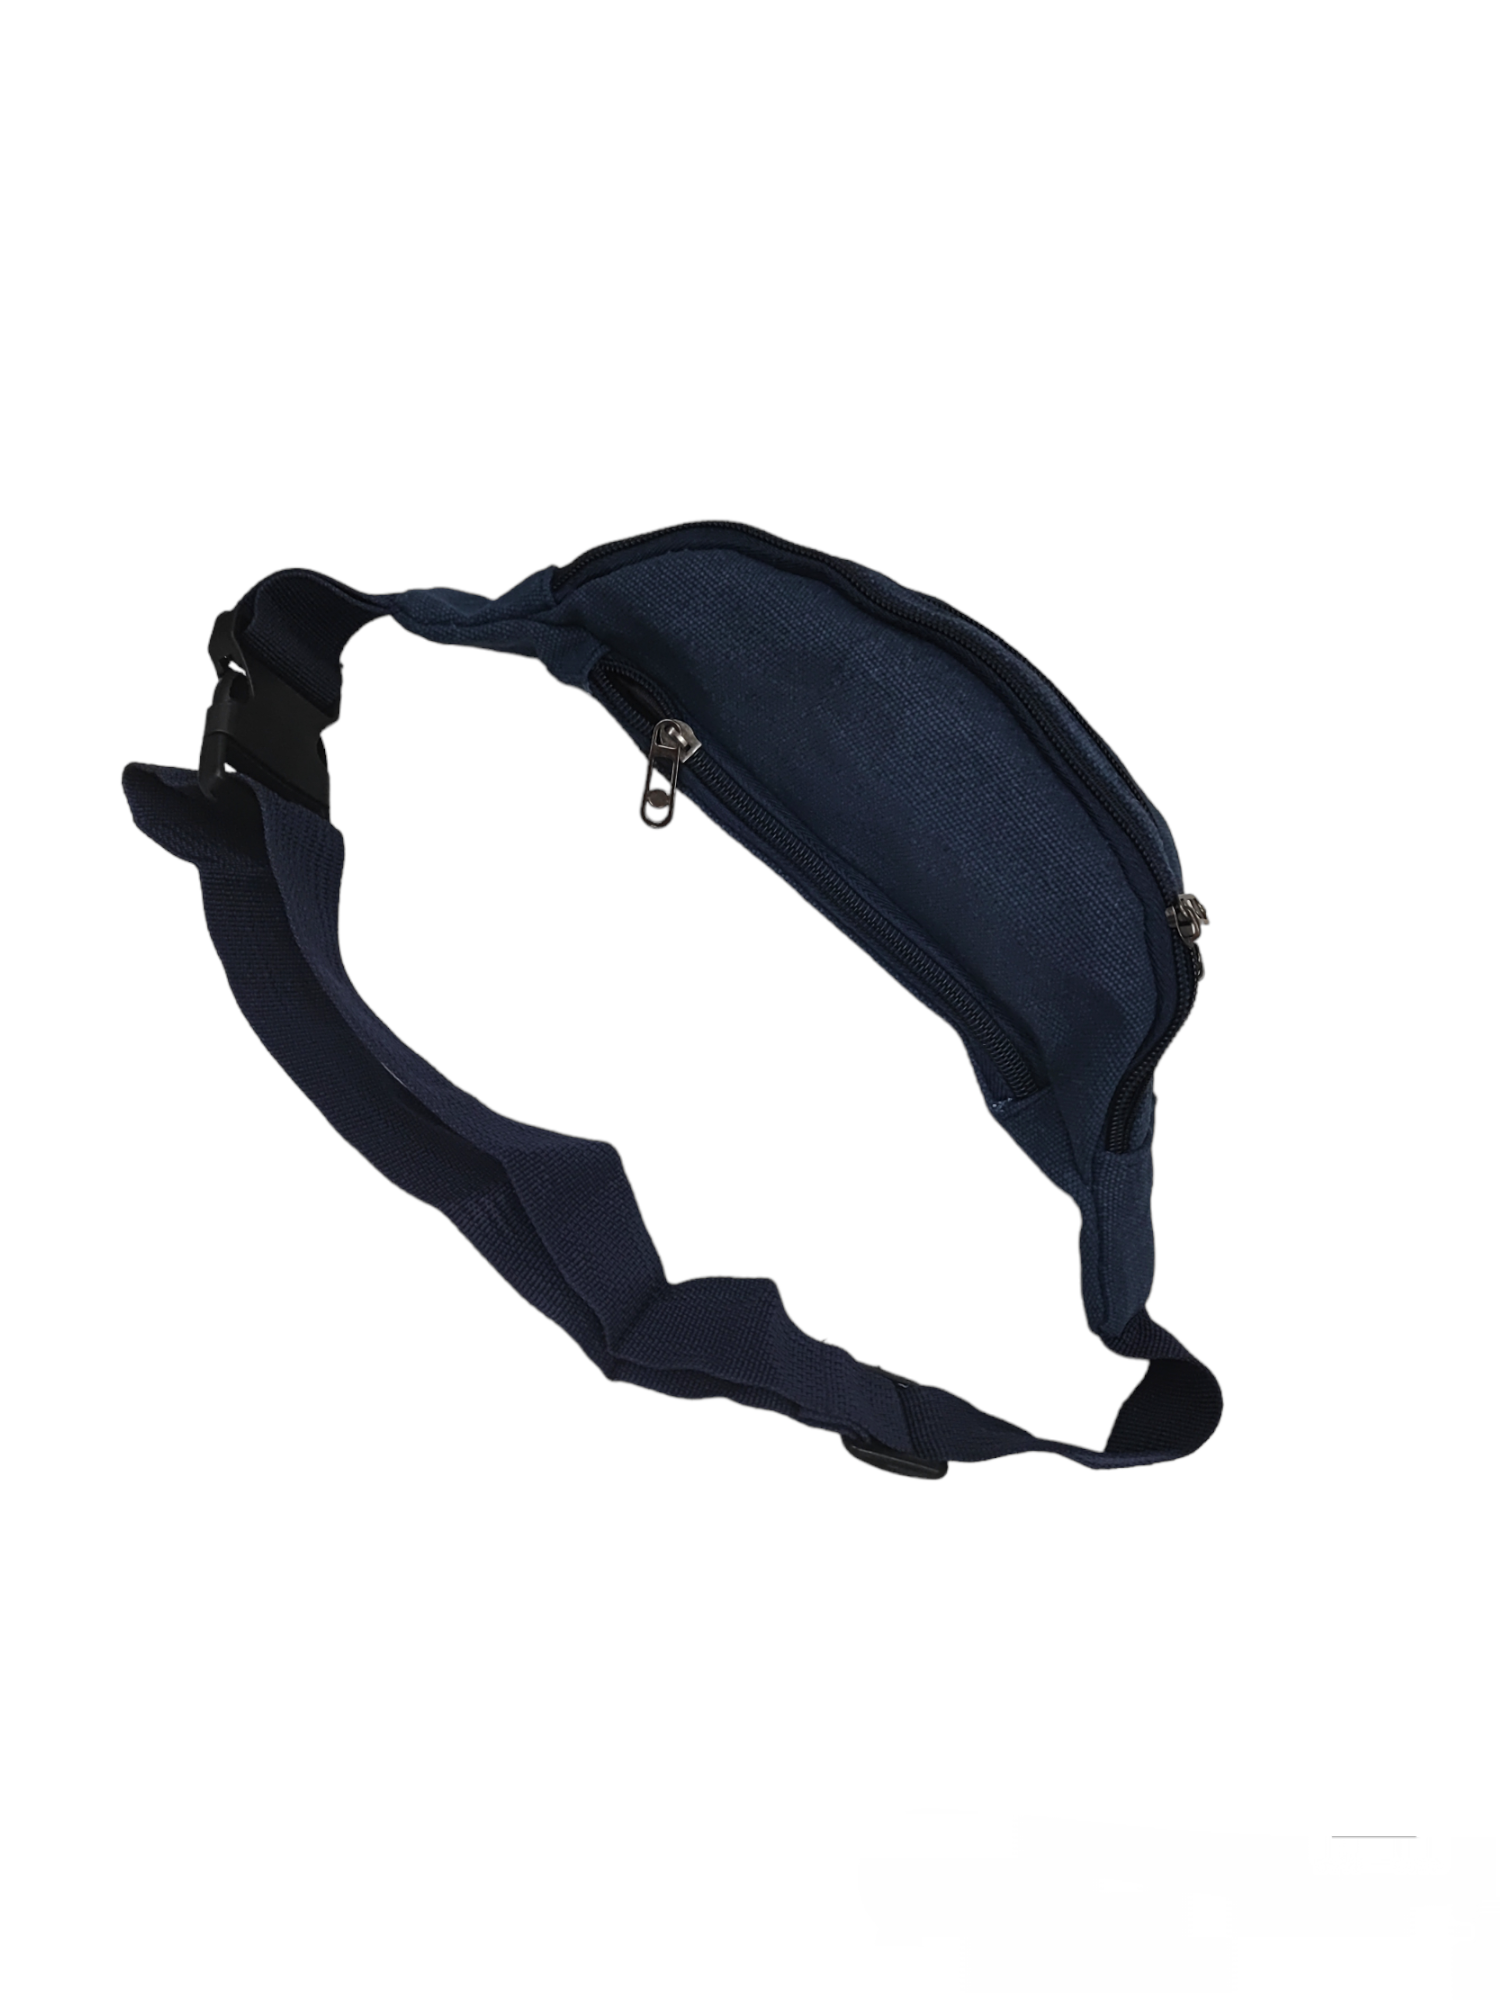 Bags Fanny pack (x6)